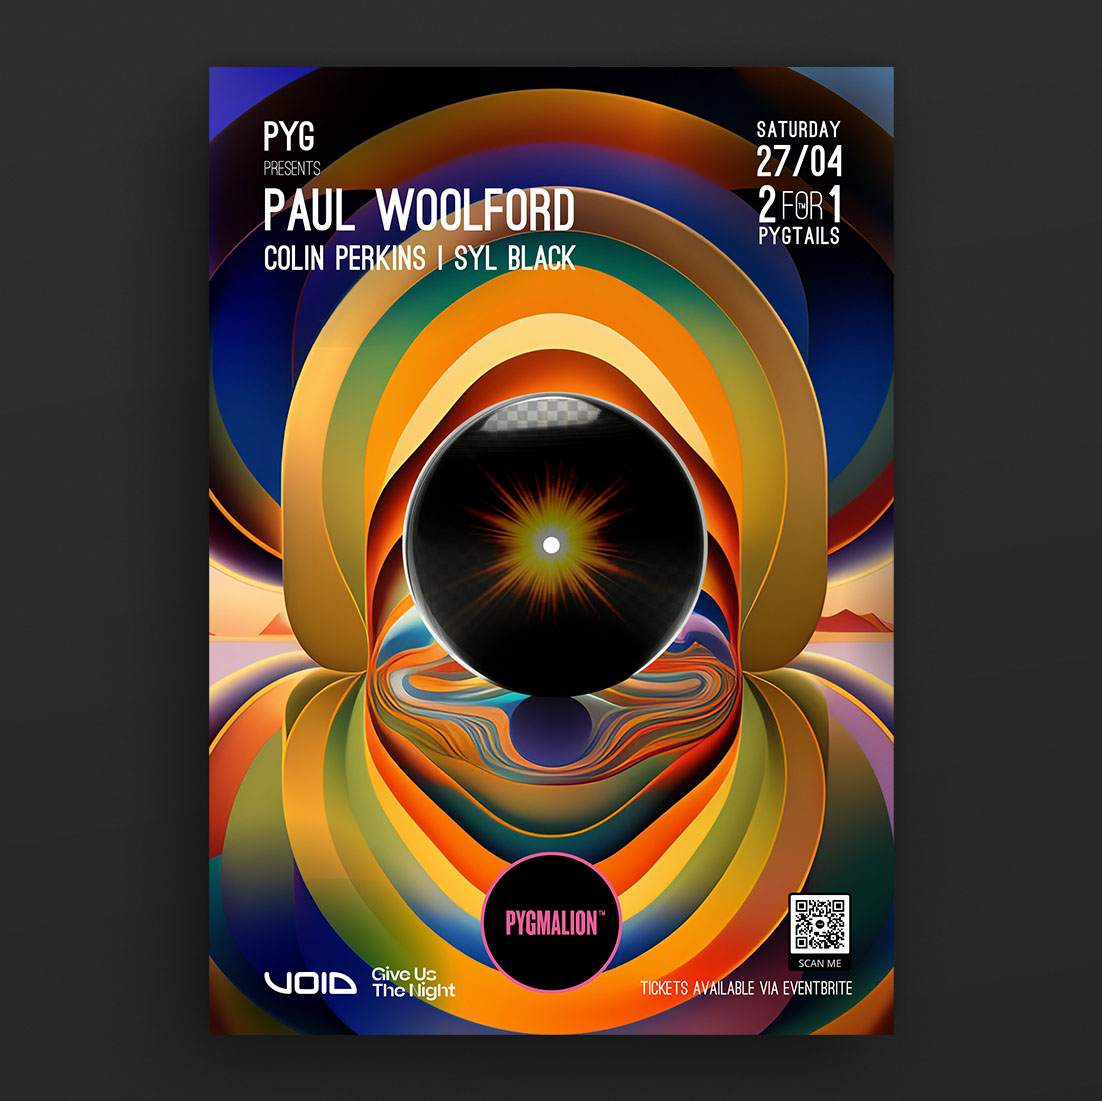 Pyg presents Paul Woolford - フライヤー表